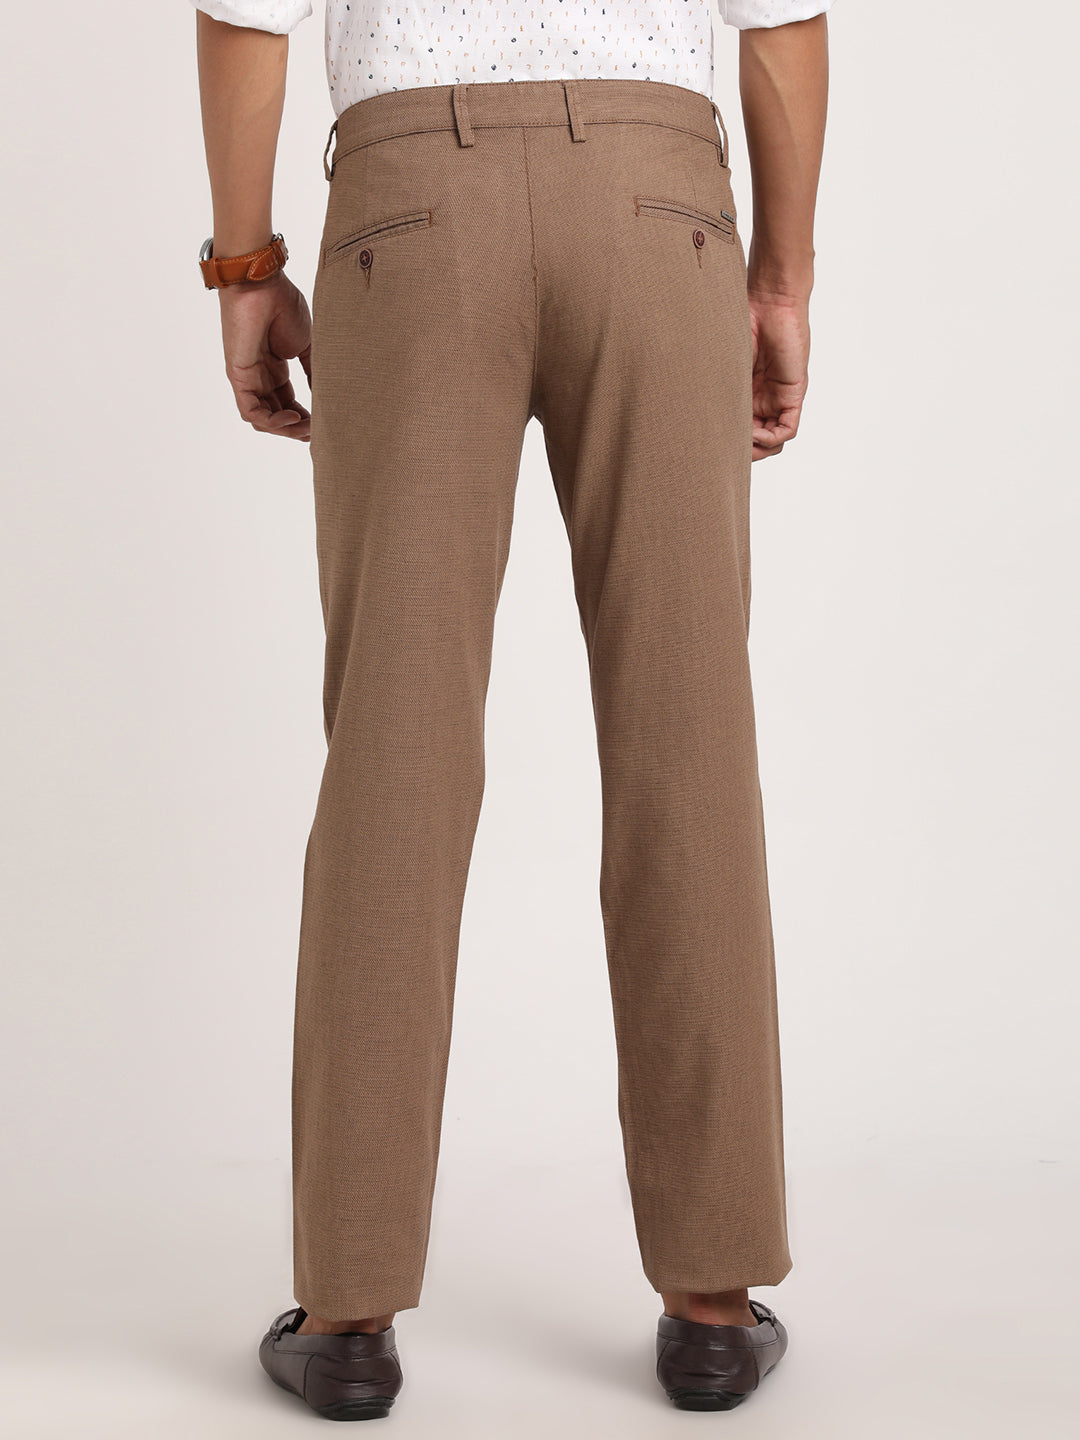 Casual Comfort, Refined Style: Embracing the Charm of Chino Trousers